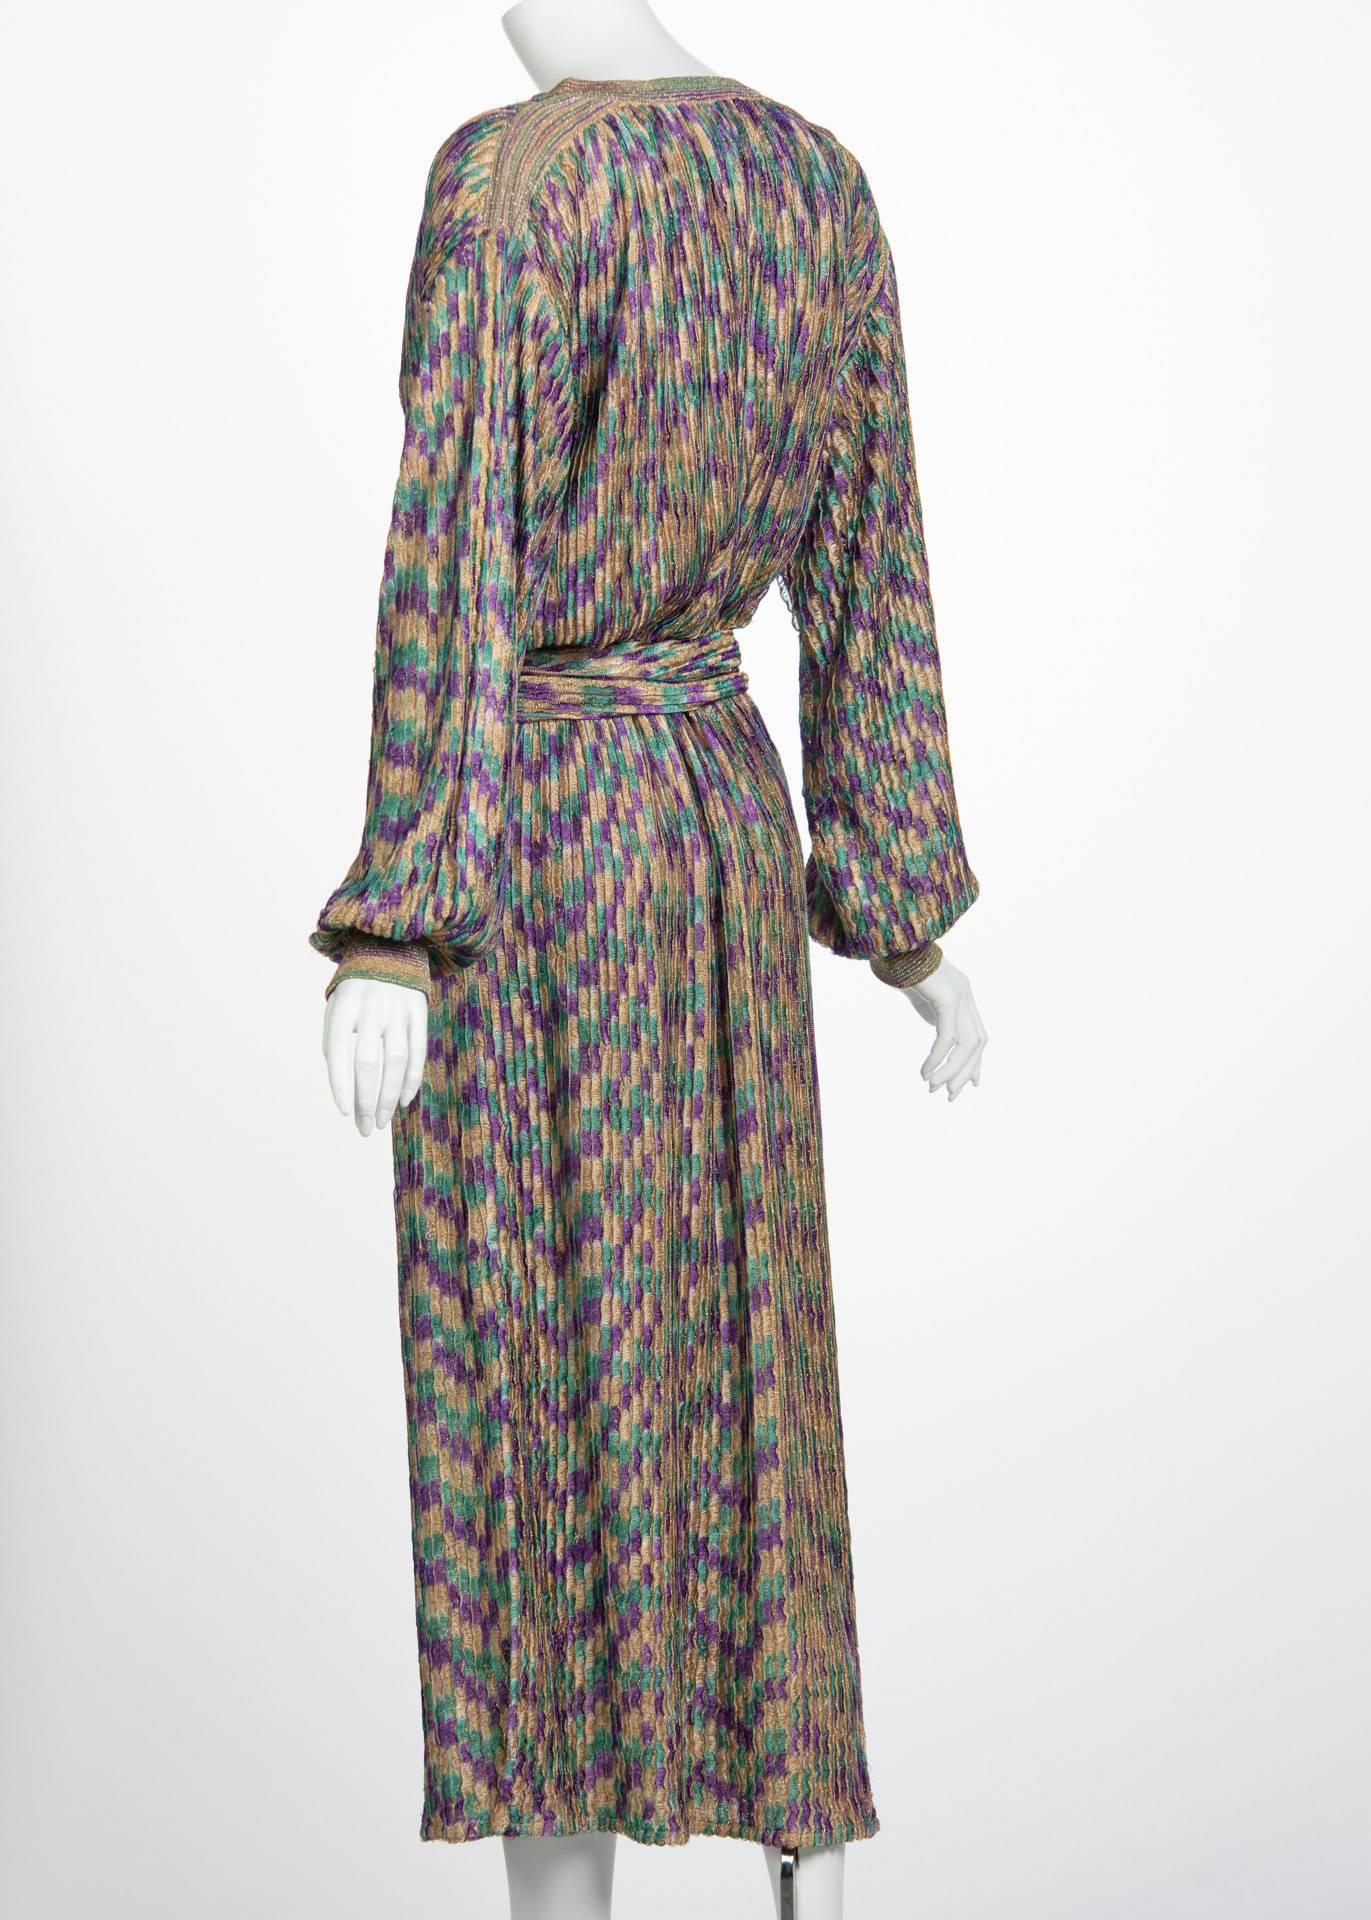 Gray Missoni Multicolored Jewel Tone Metallic Knit Belted Dress, 1970s  For Sale